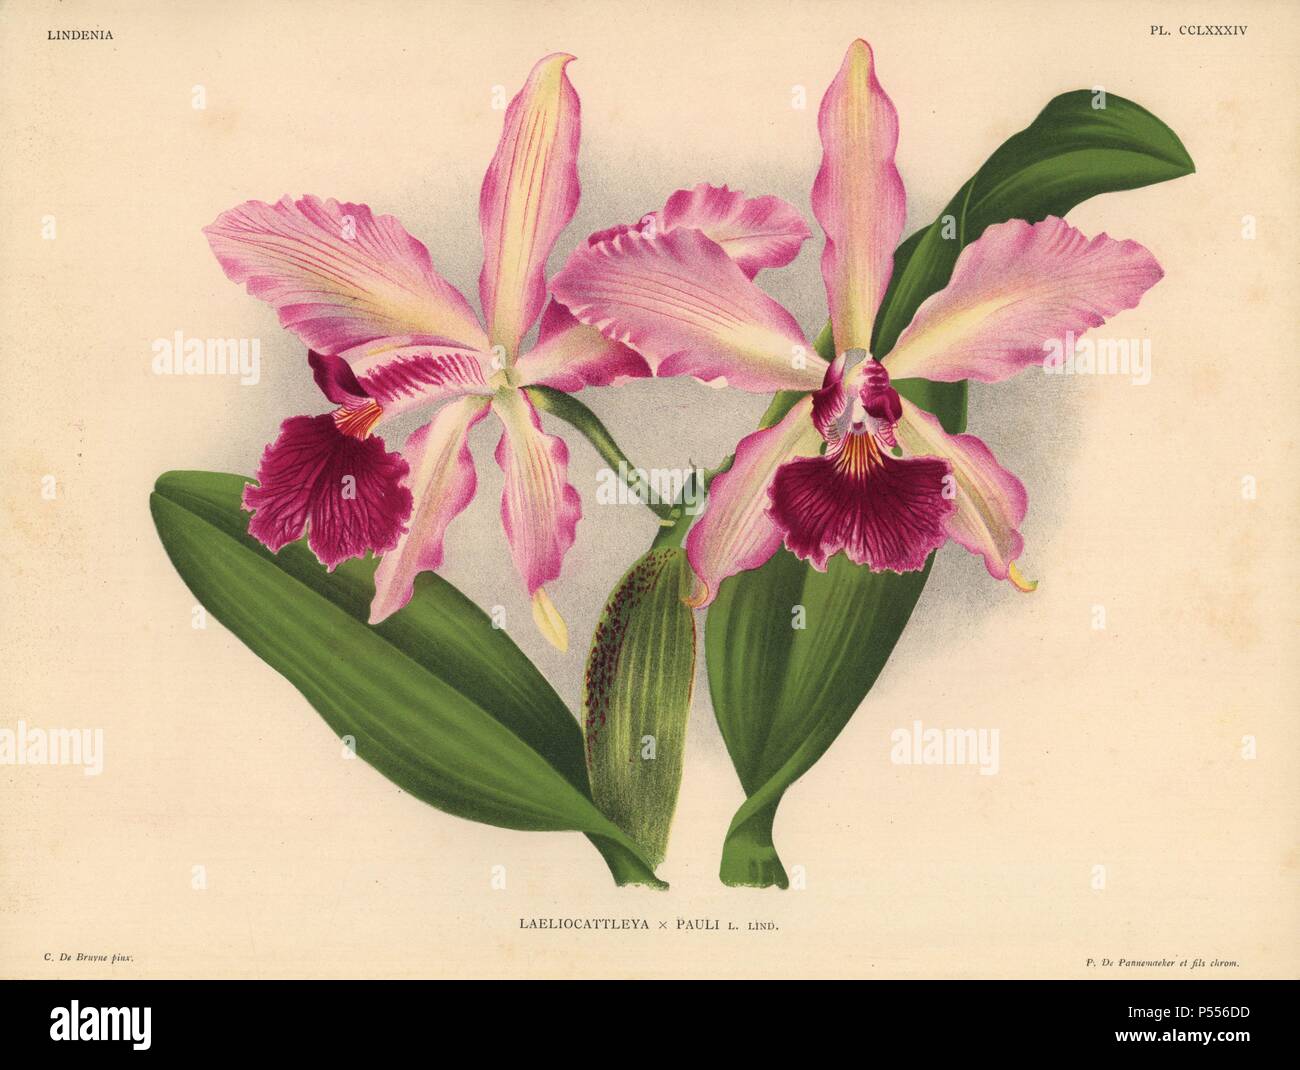 Mr. Paul Otlet's Laeliocattleya hybrid orchid. Illustration drawn by C. de Bruyne and chromolithographed by P. de Pannemaeker et fils from Lucien Linden's 'Lindenia, Iconographie des Orchidees,' Brussels, 1902. Stock Photo